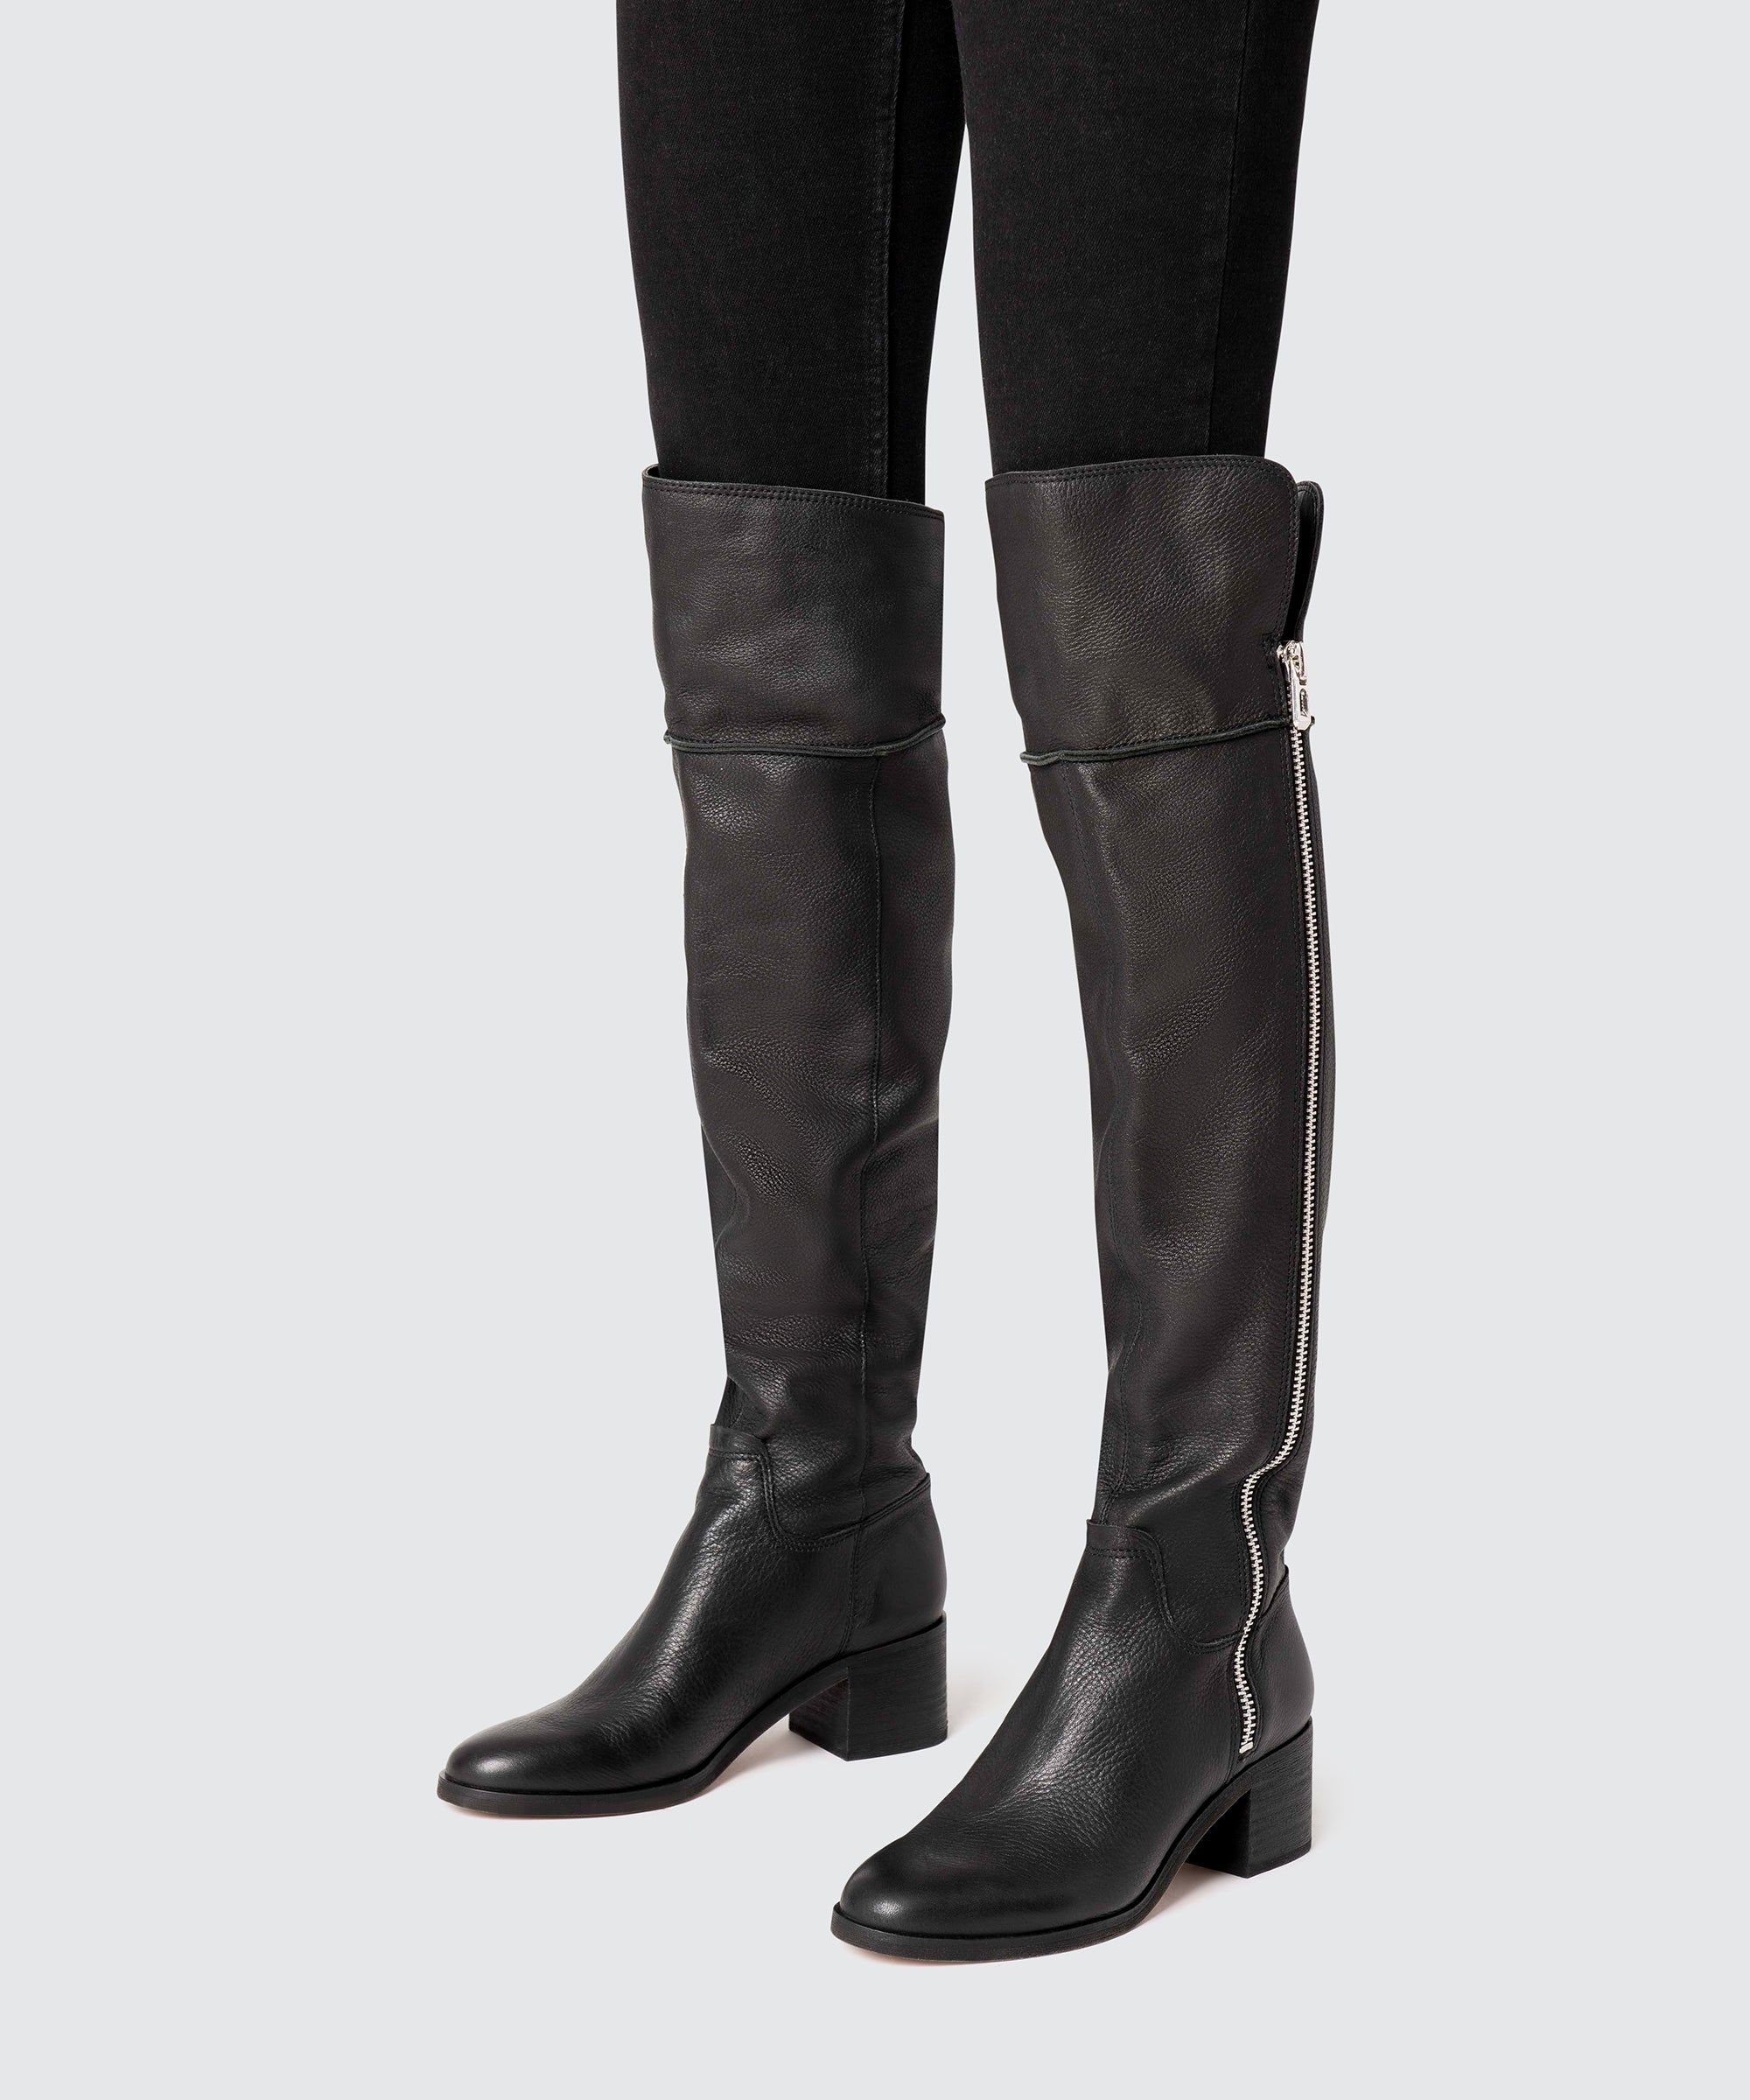 dolce vita suede over the knee boots